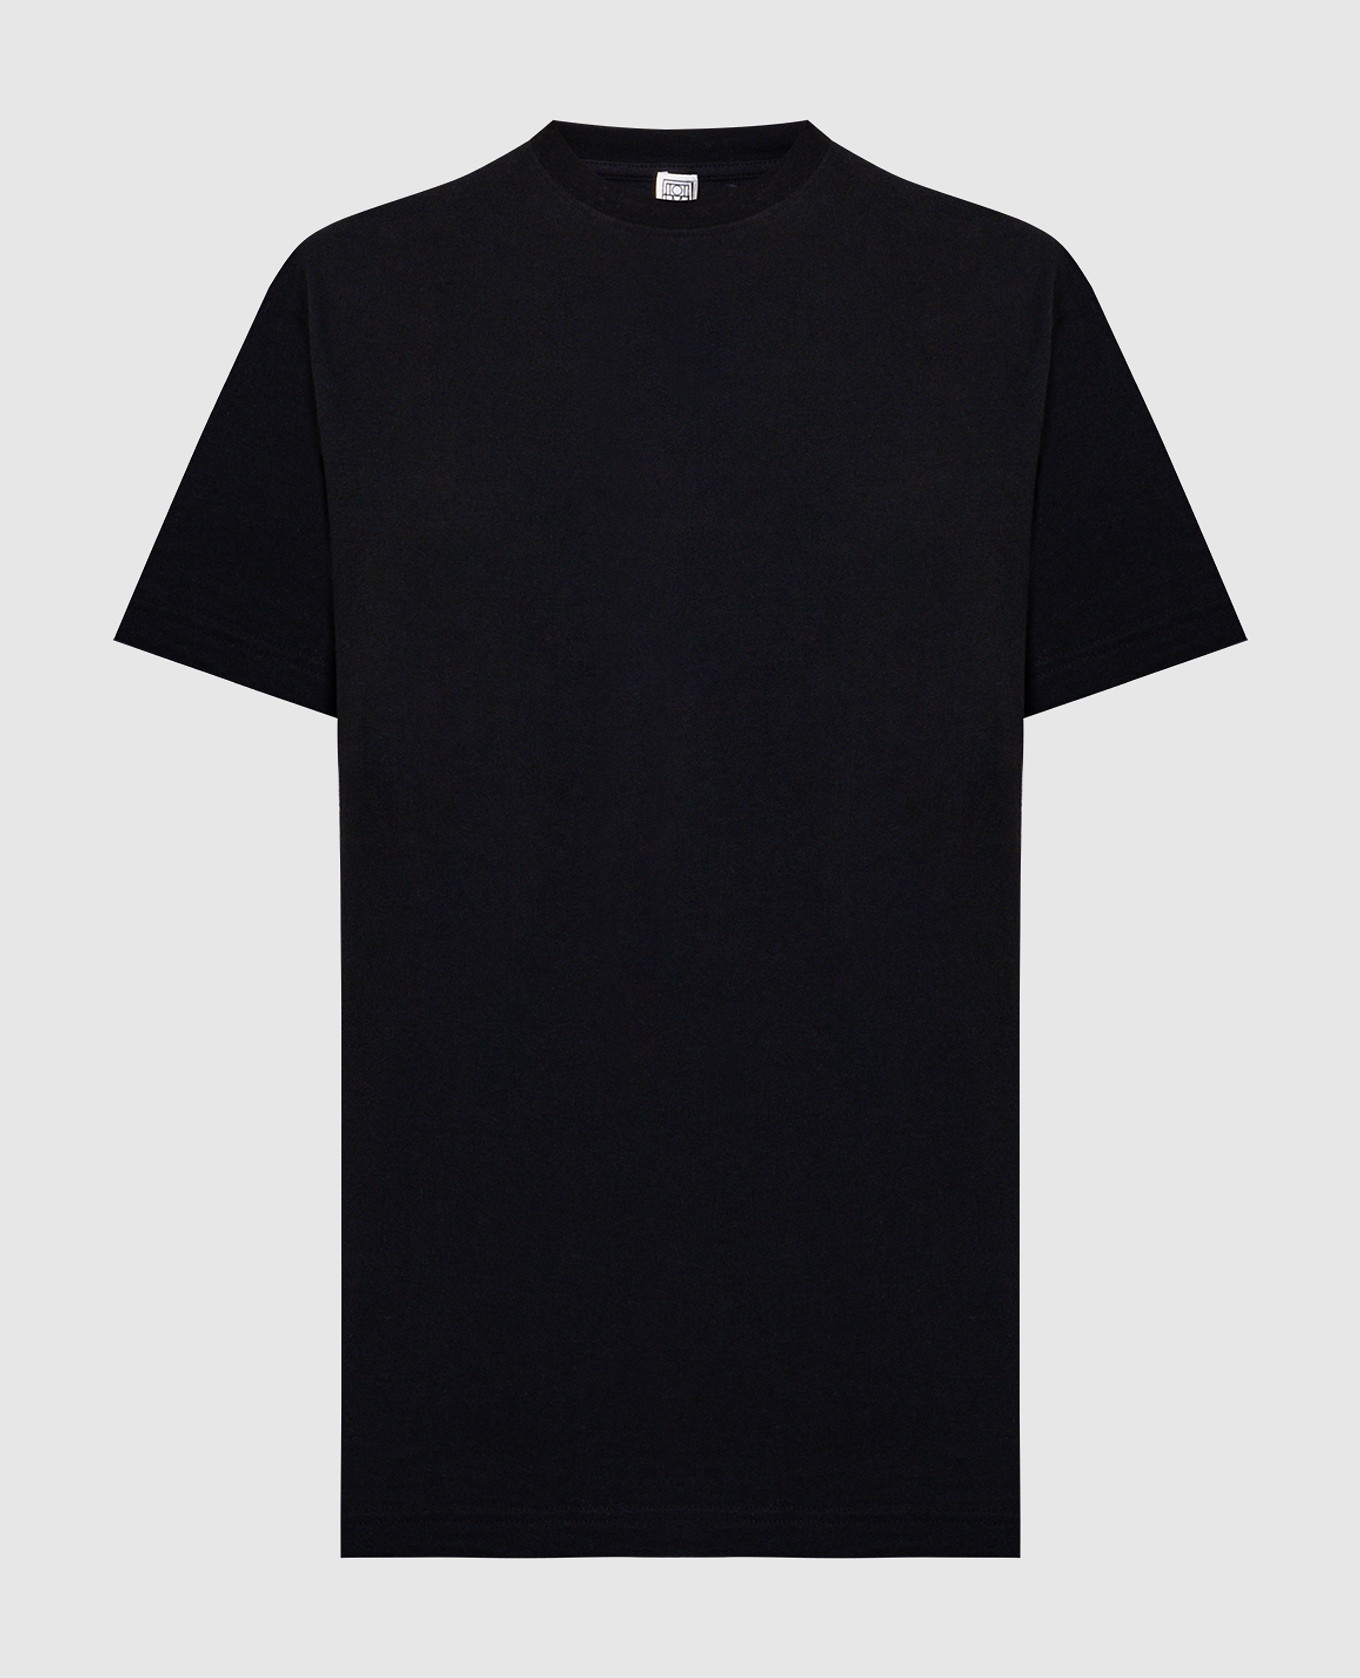 Black T-shirt with a straight cut